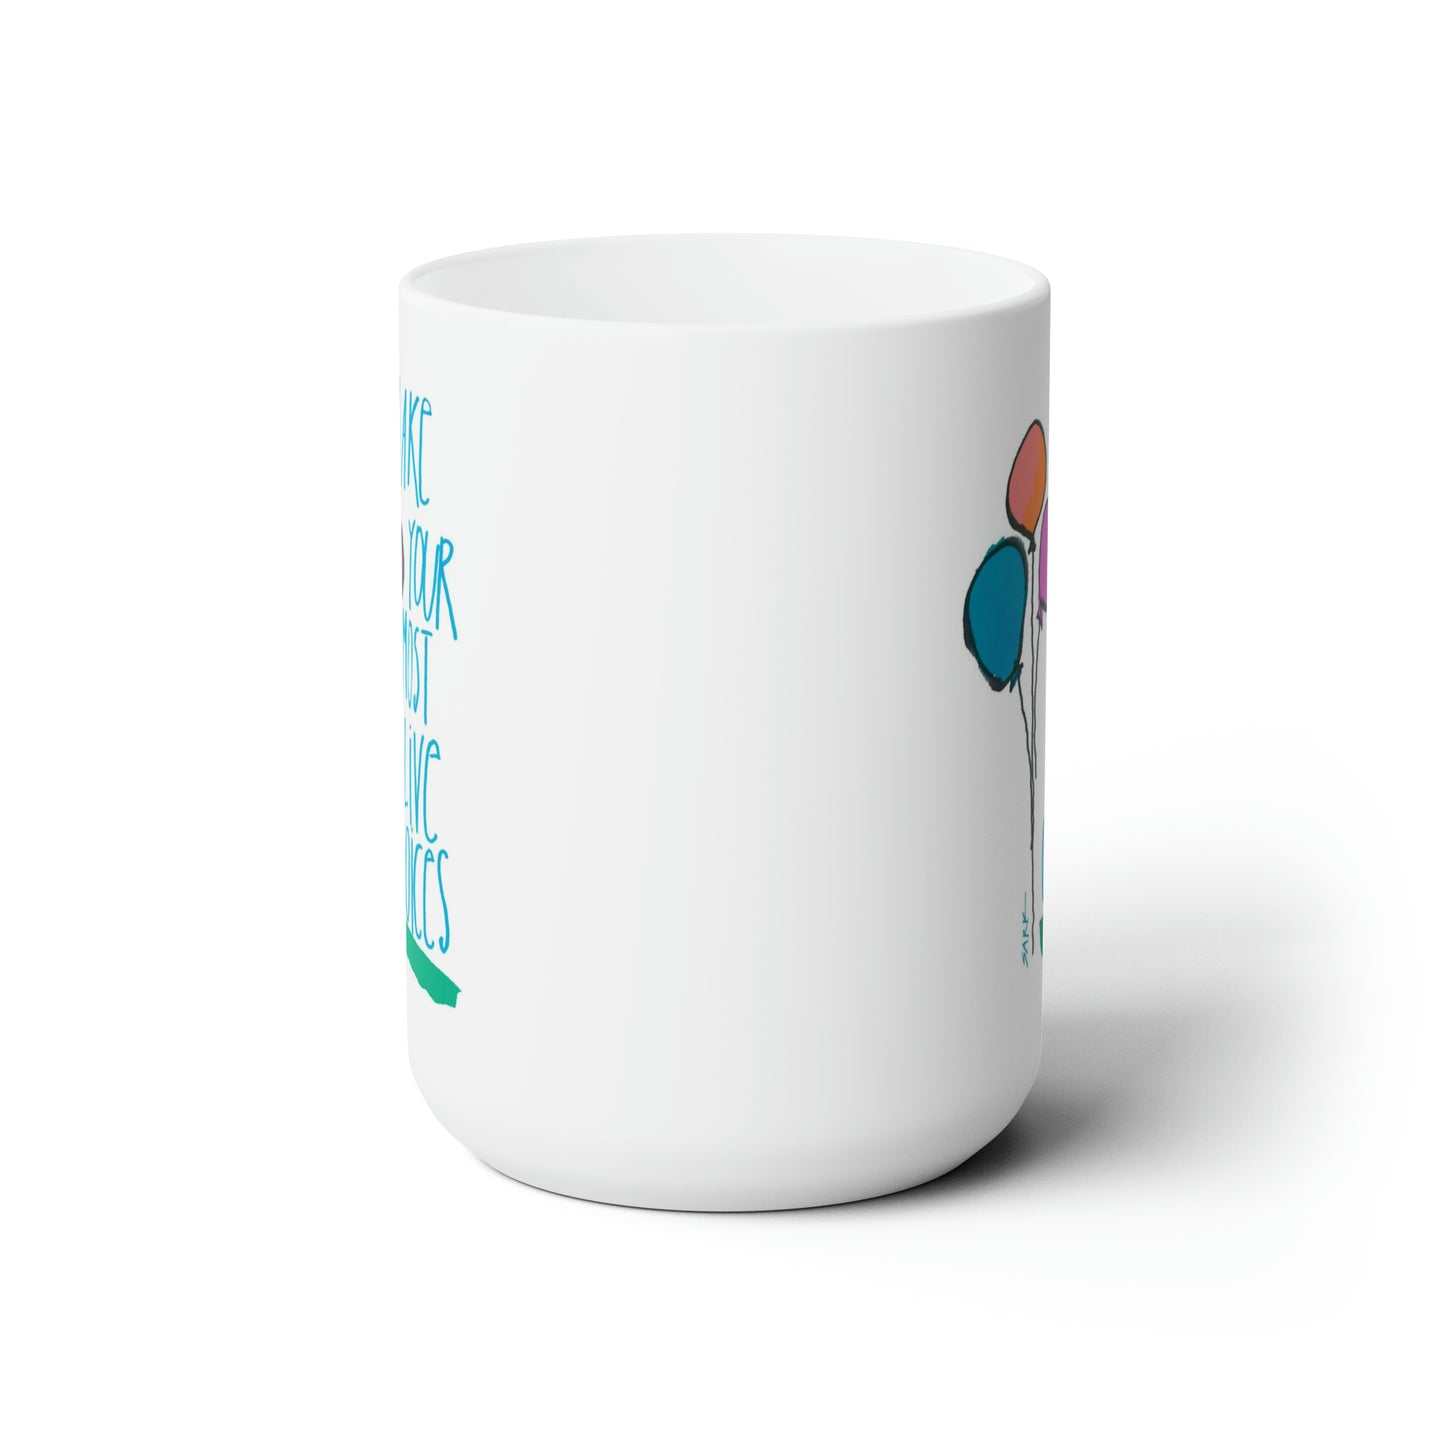 Make Your Most Alive Choices by SARK - White Ceramic Mug